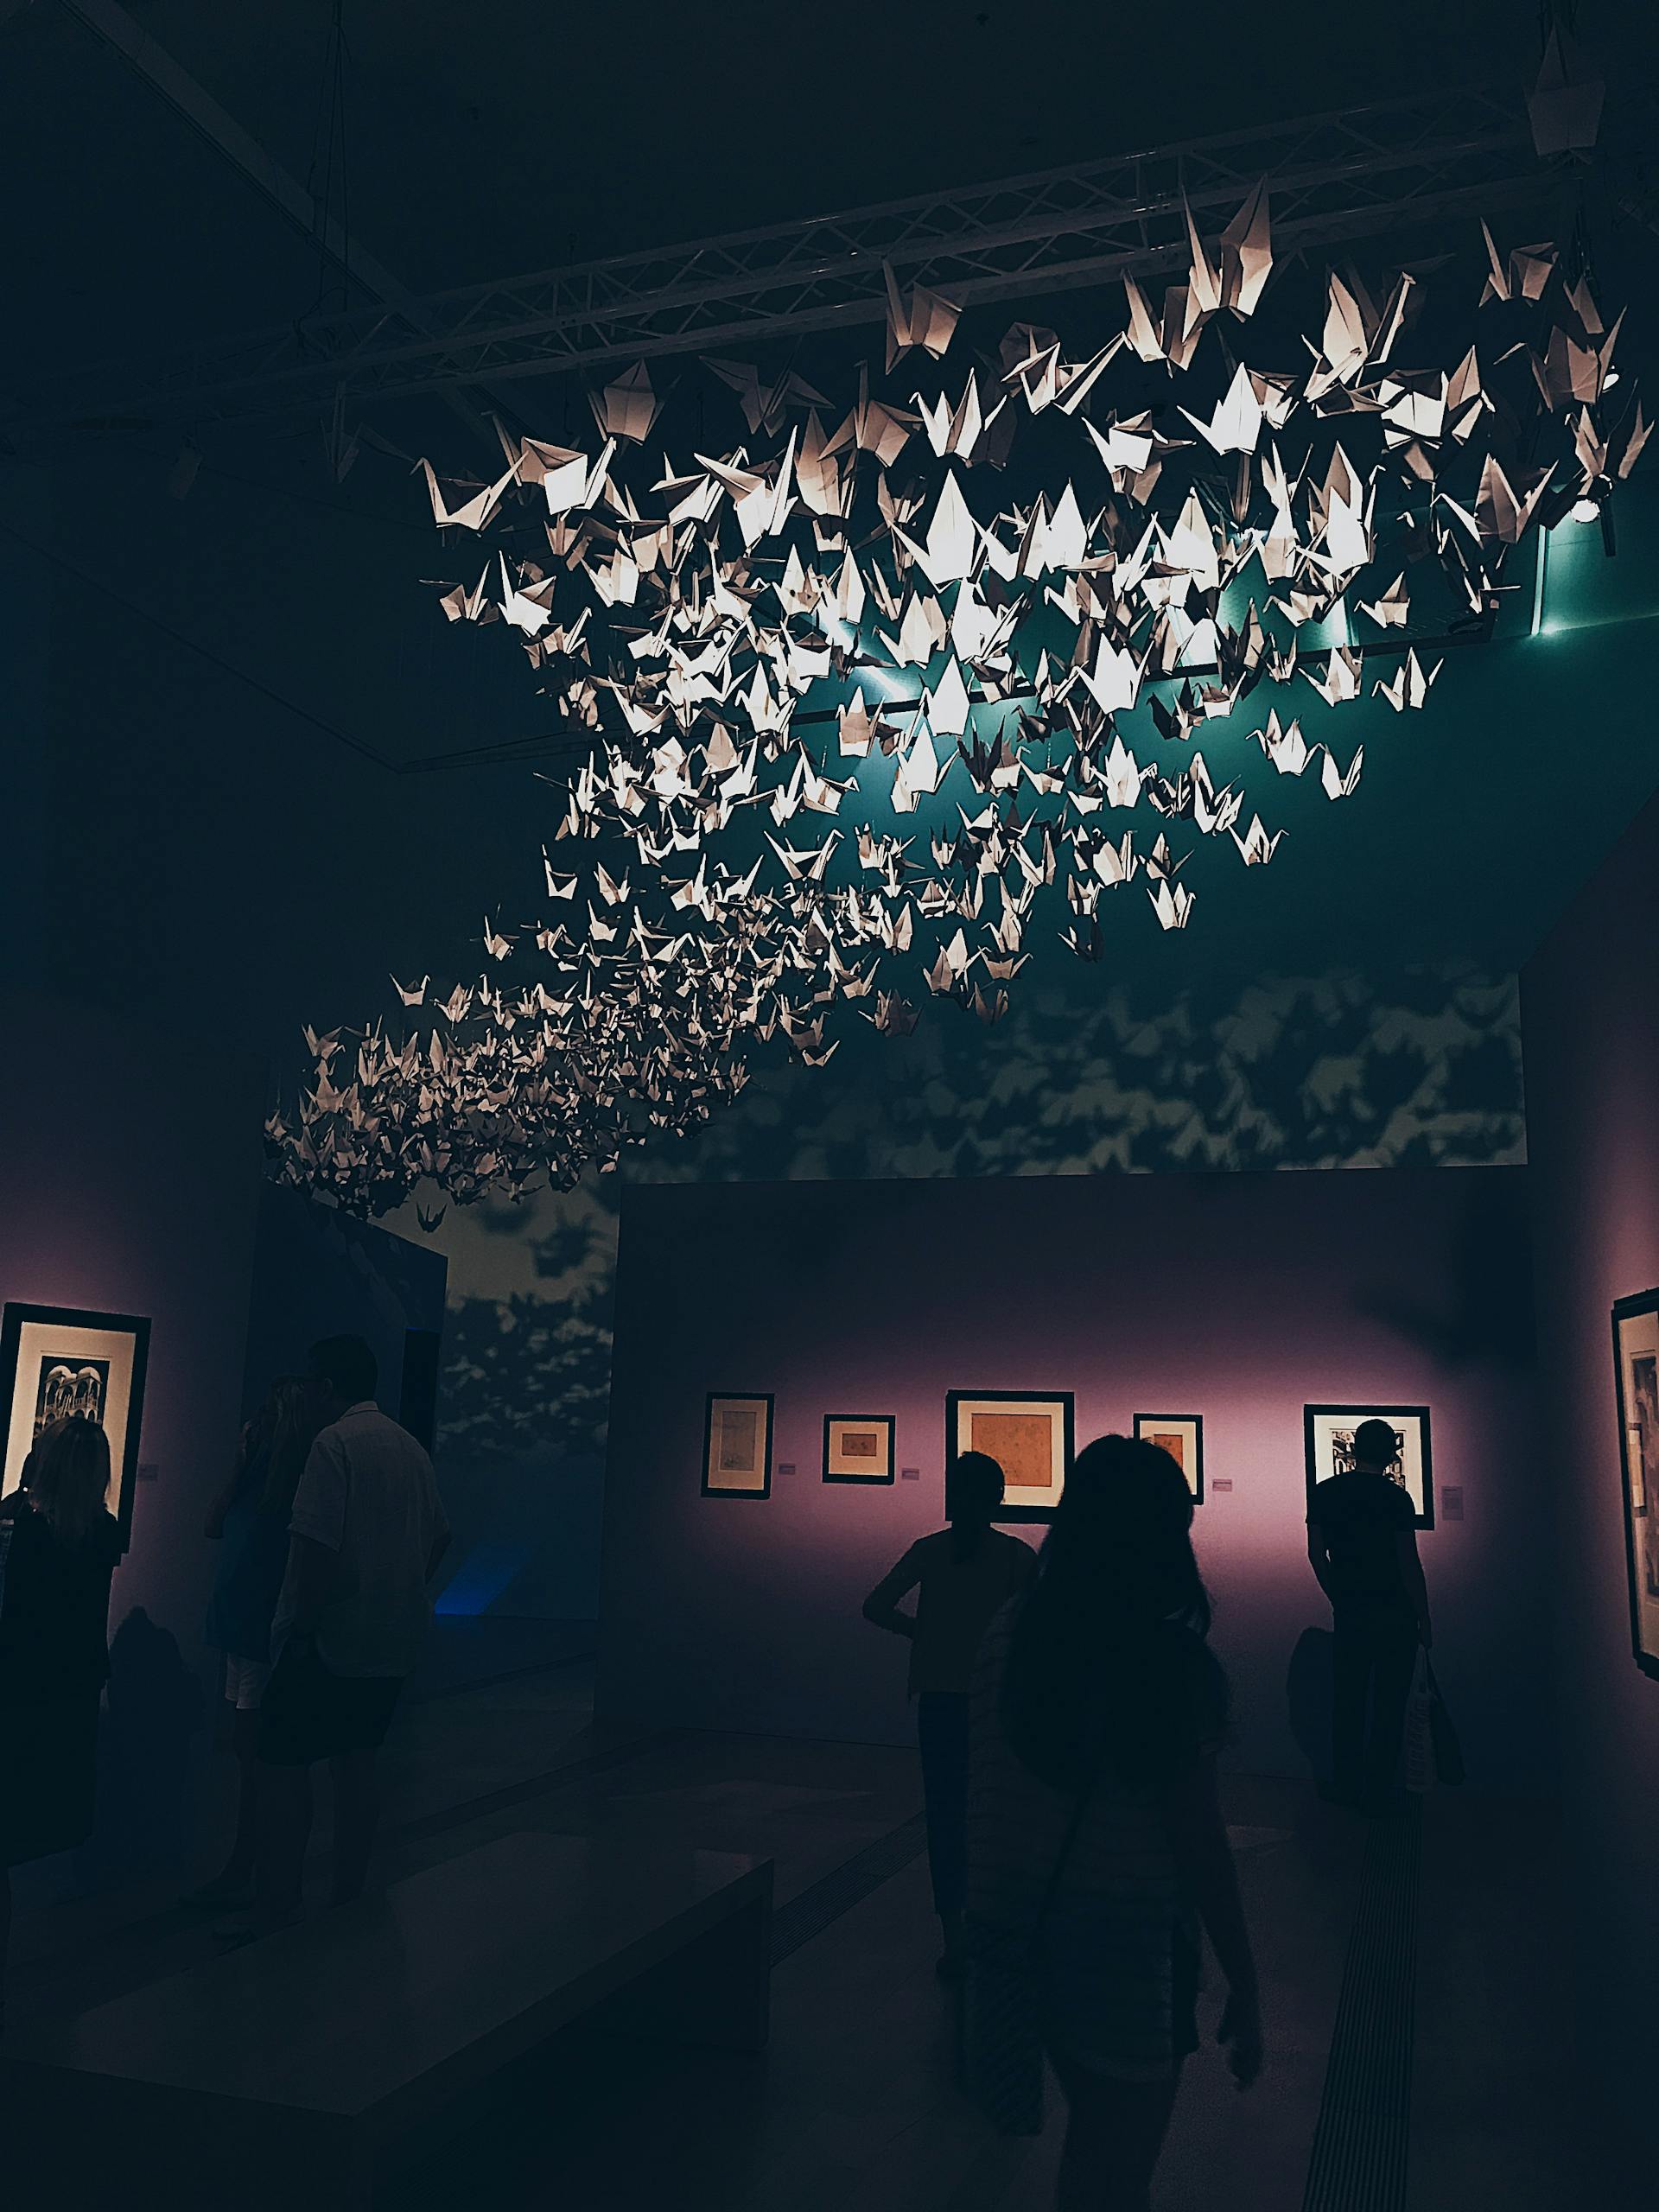 An exhibition at a gallery | Source: Pexels